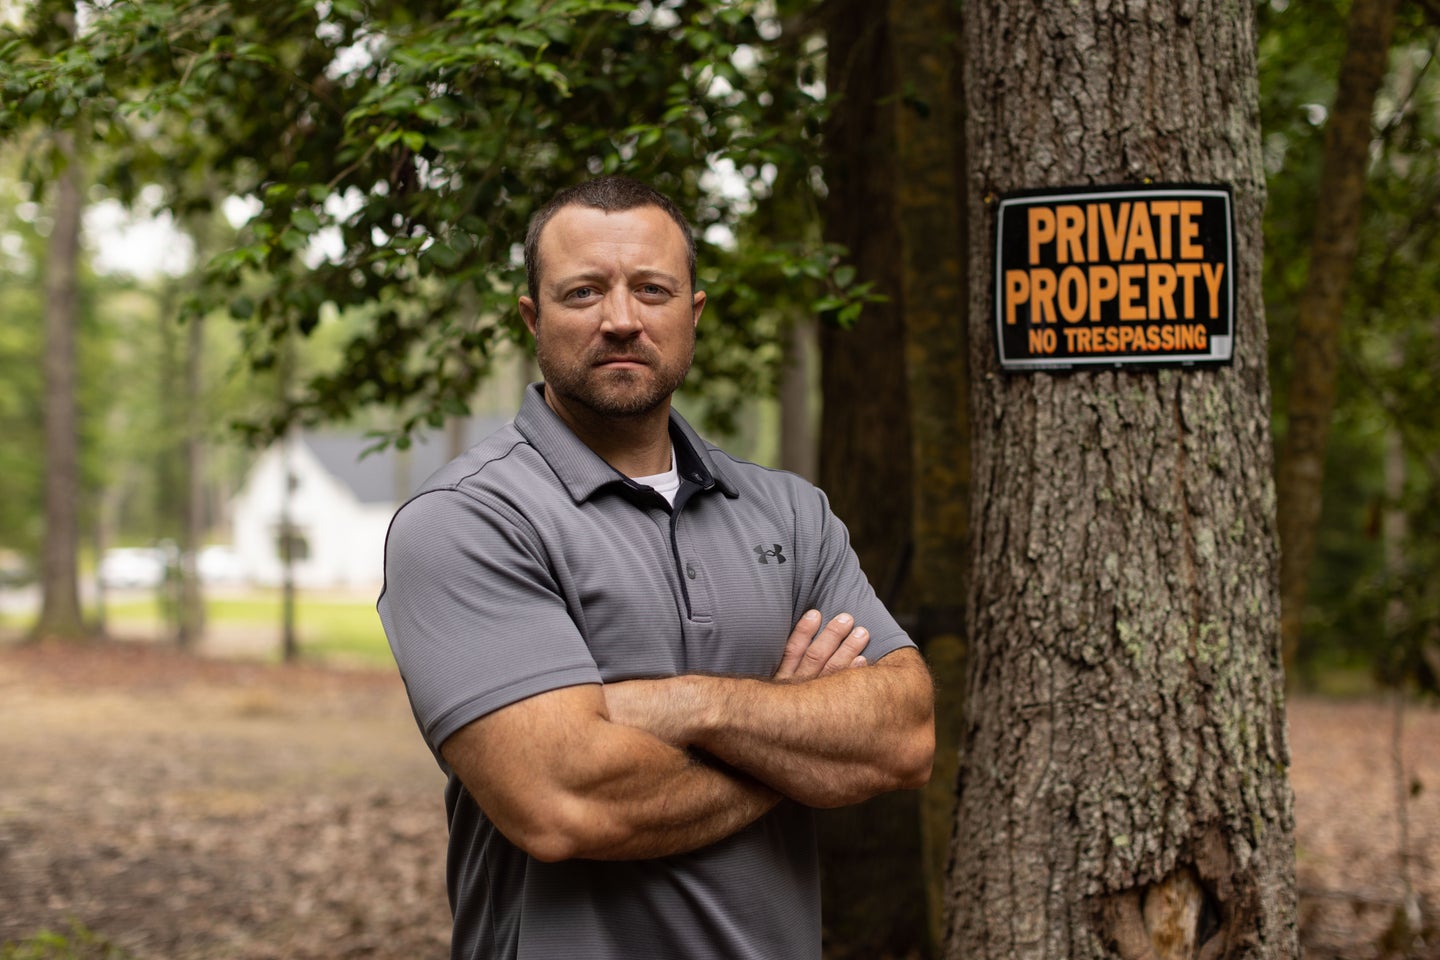 The defendant claims game wardens illegally searched and seized his private property without a warrant.